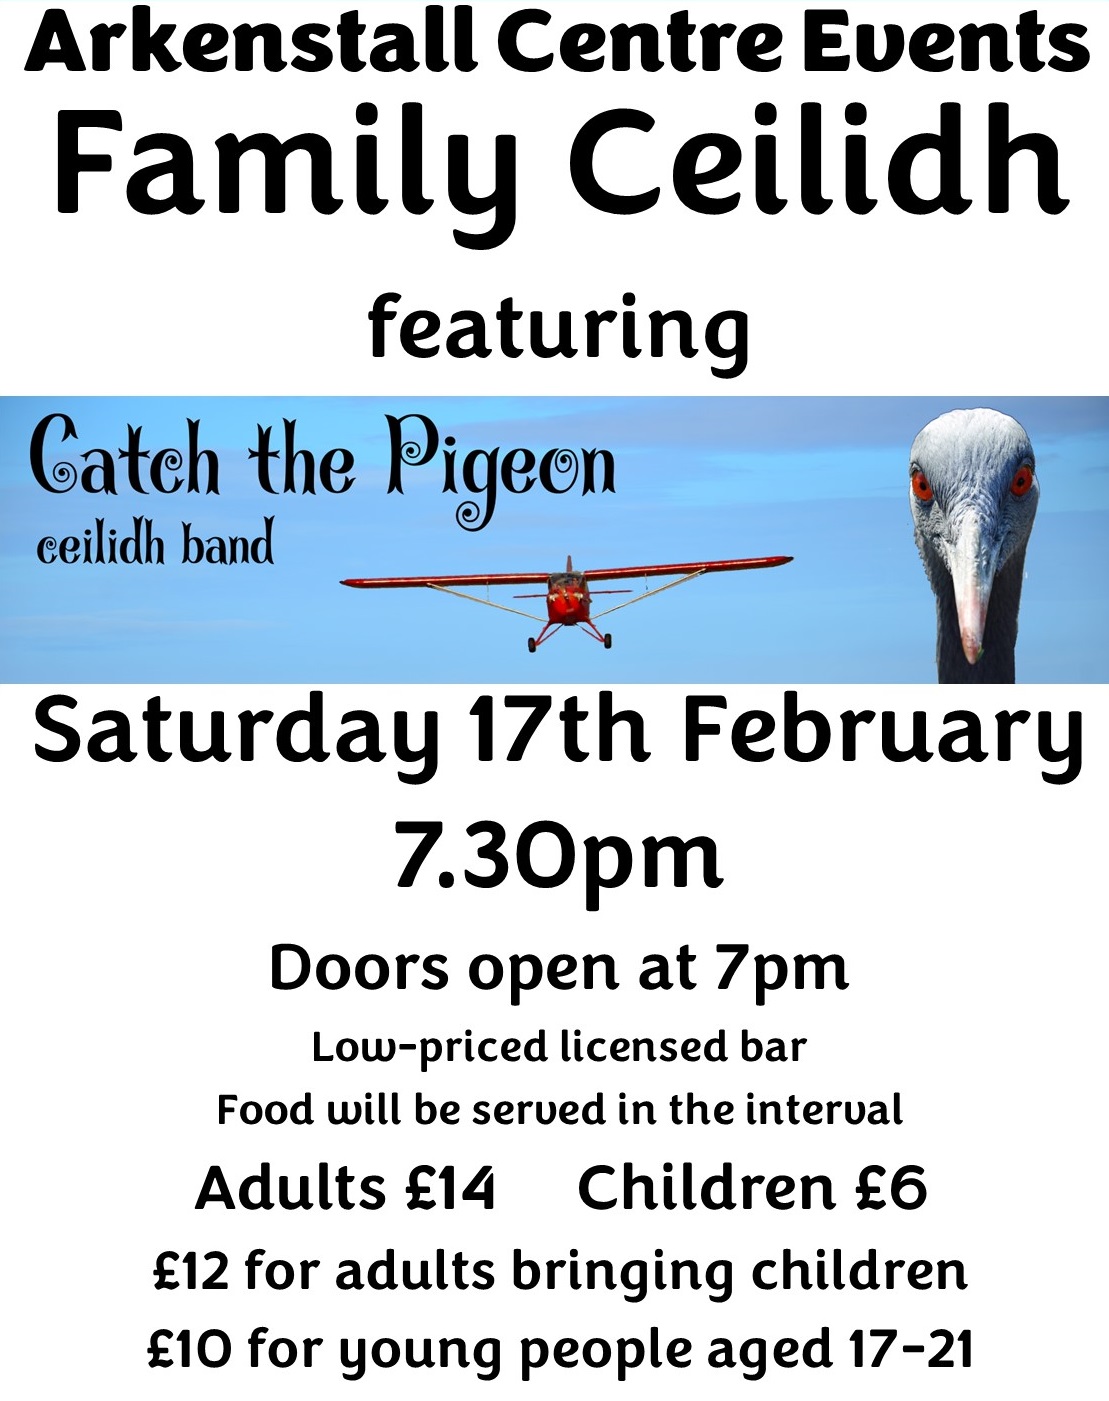 Book tickets for the Ceilidh here